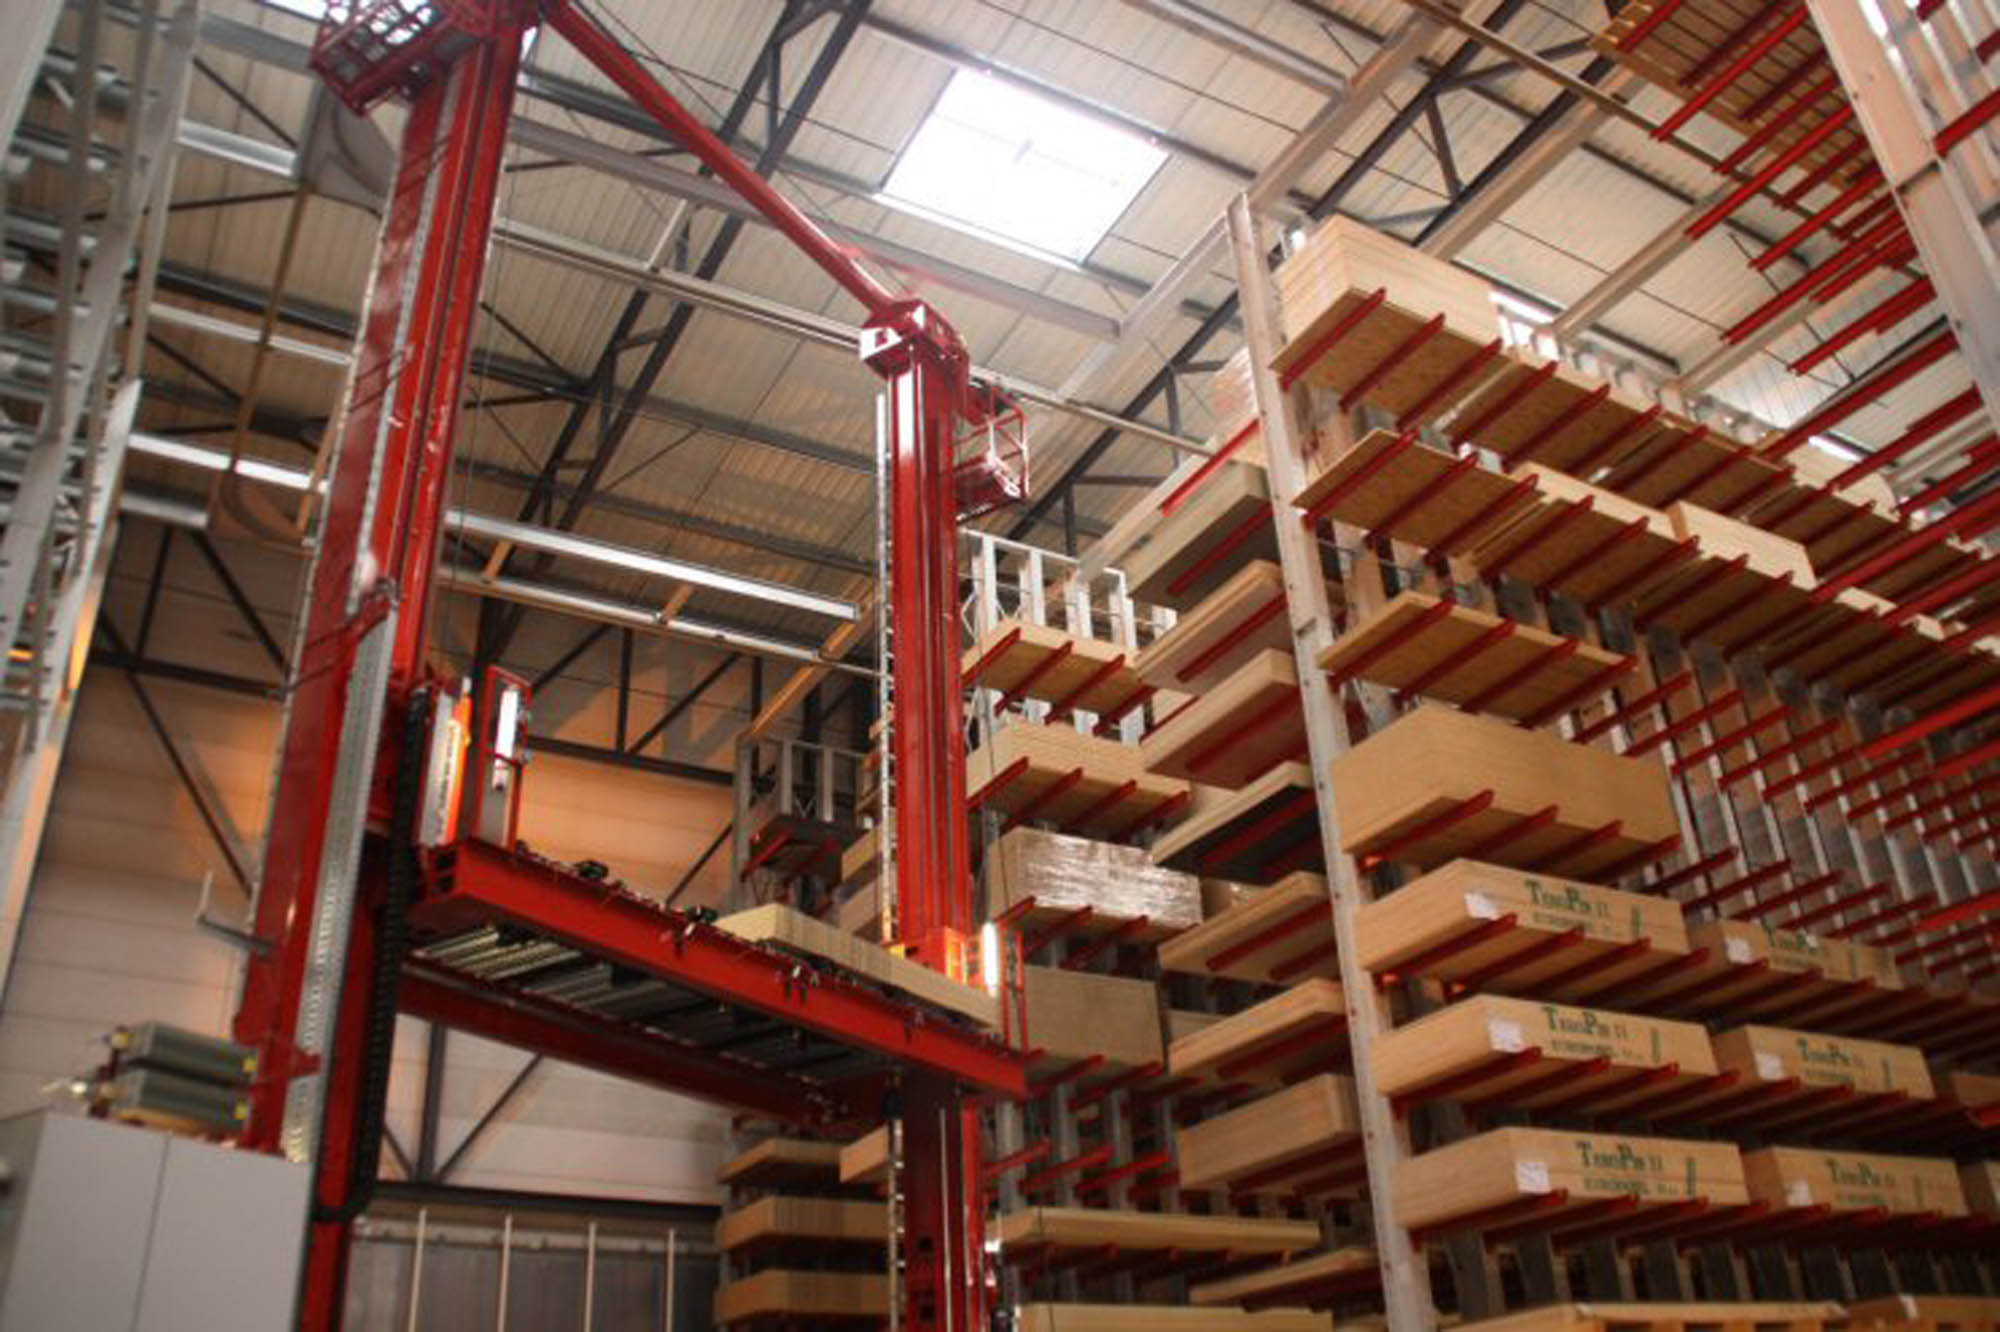 cantilever racking, automatic warehouse, stacker crane